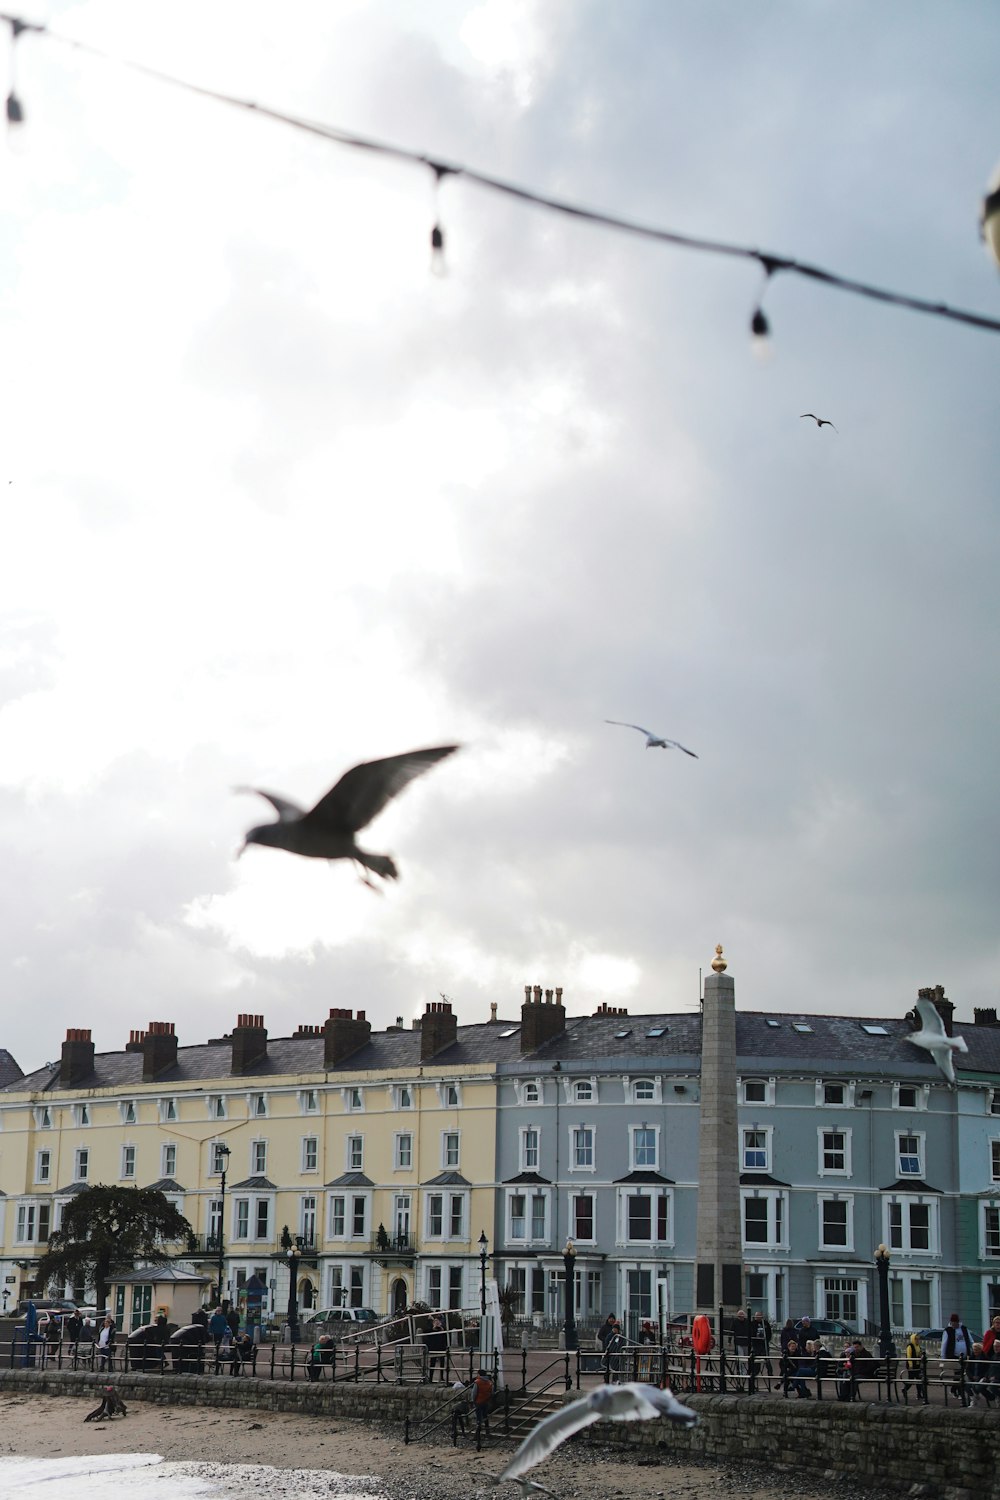 a seagull flying over a beach in front of a row of buildings